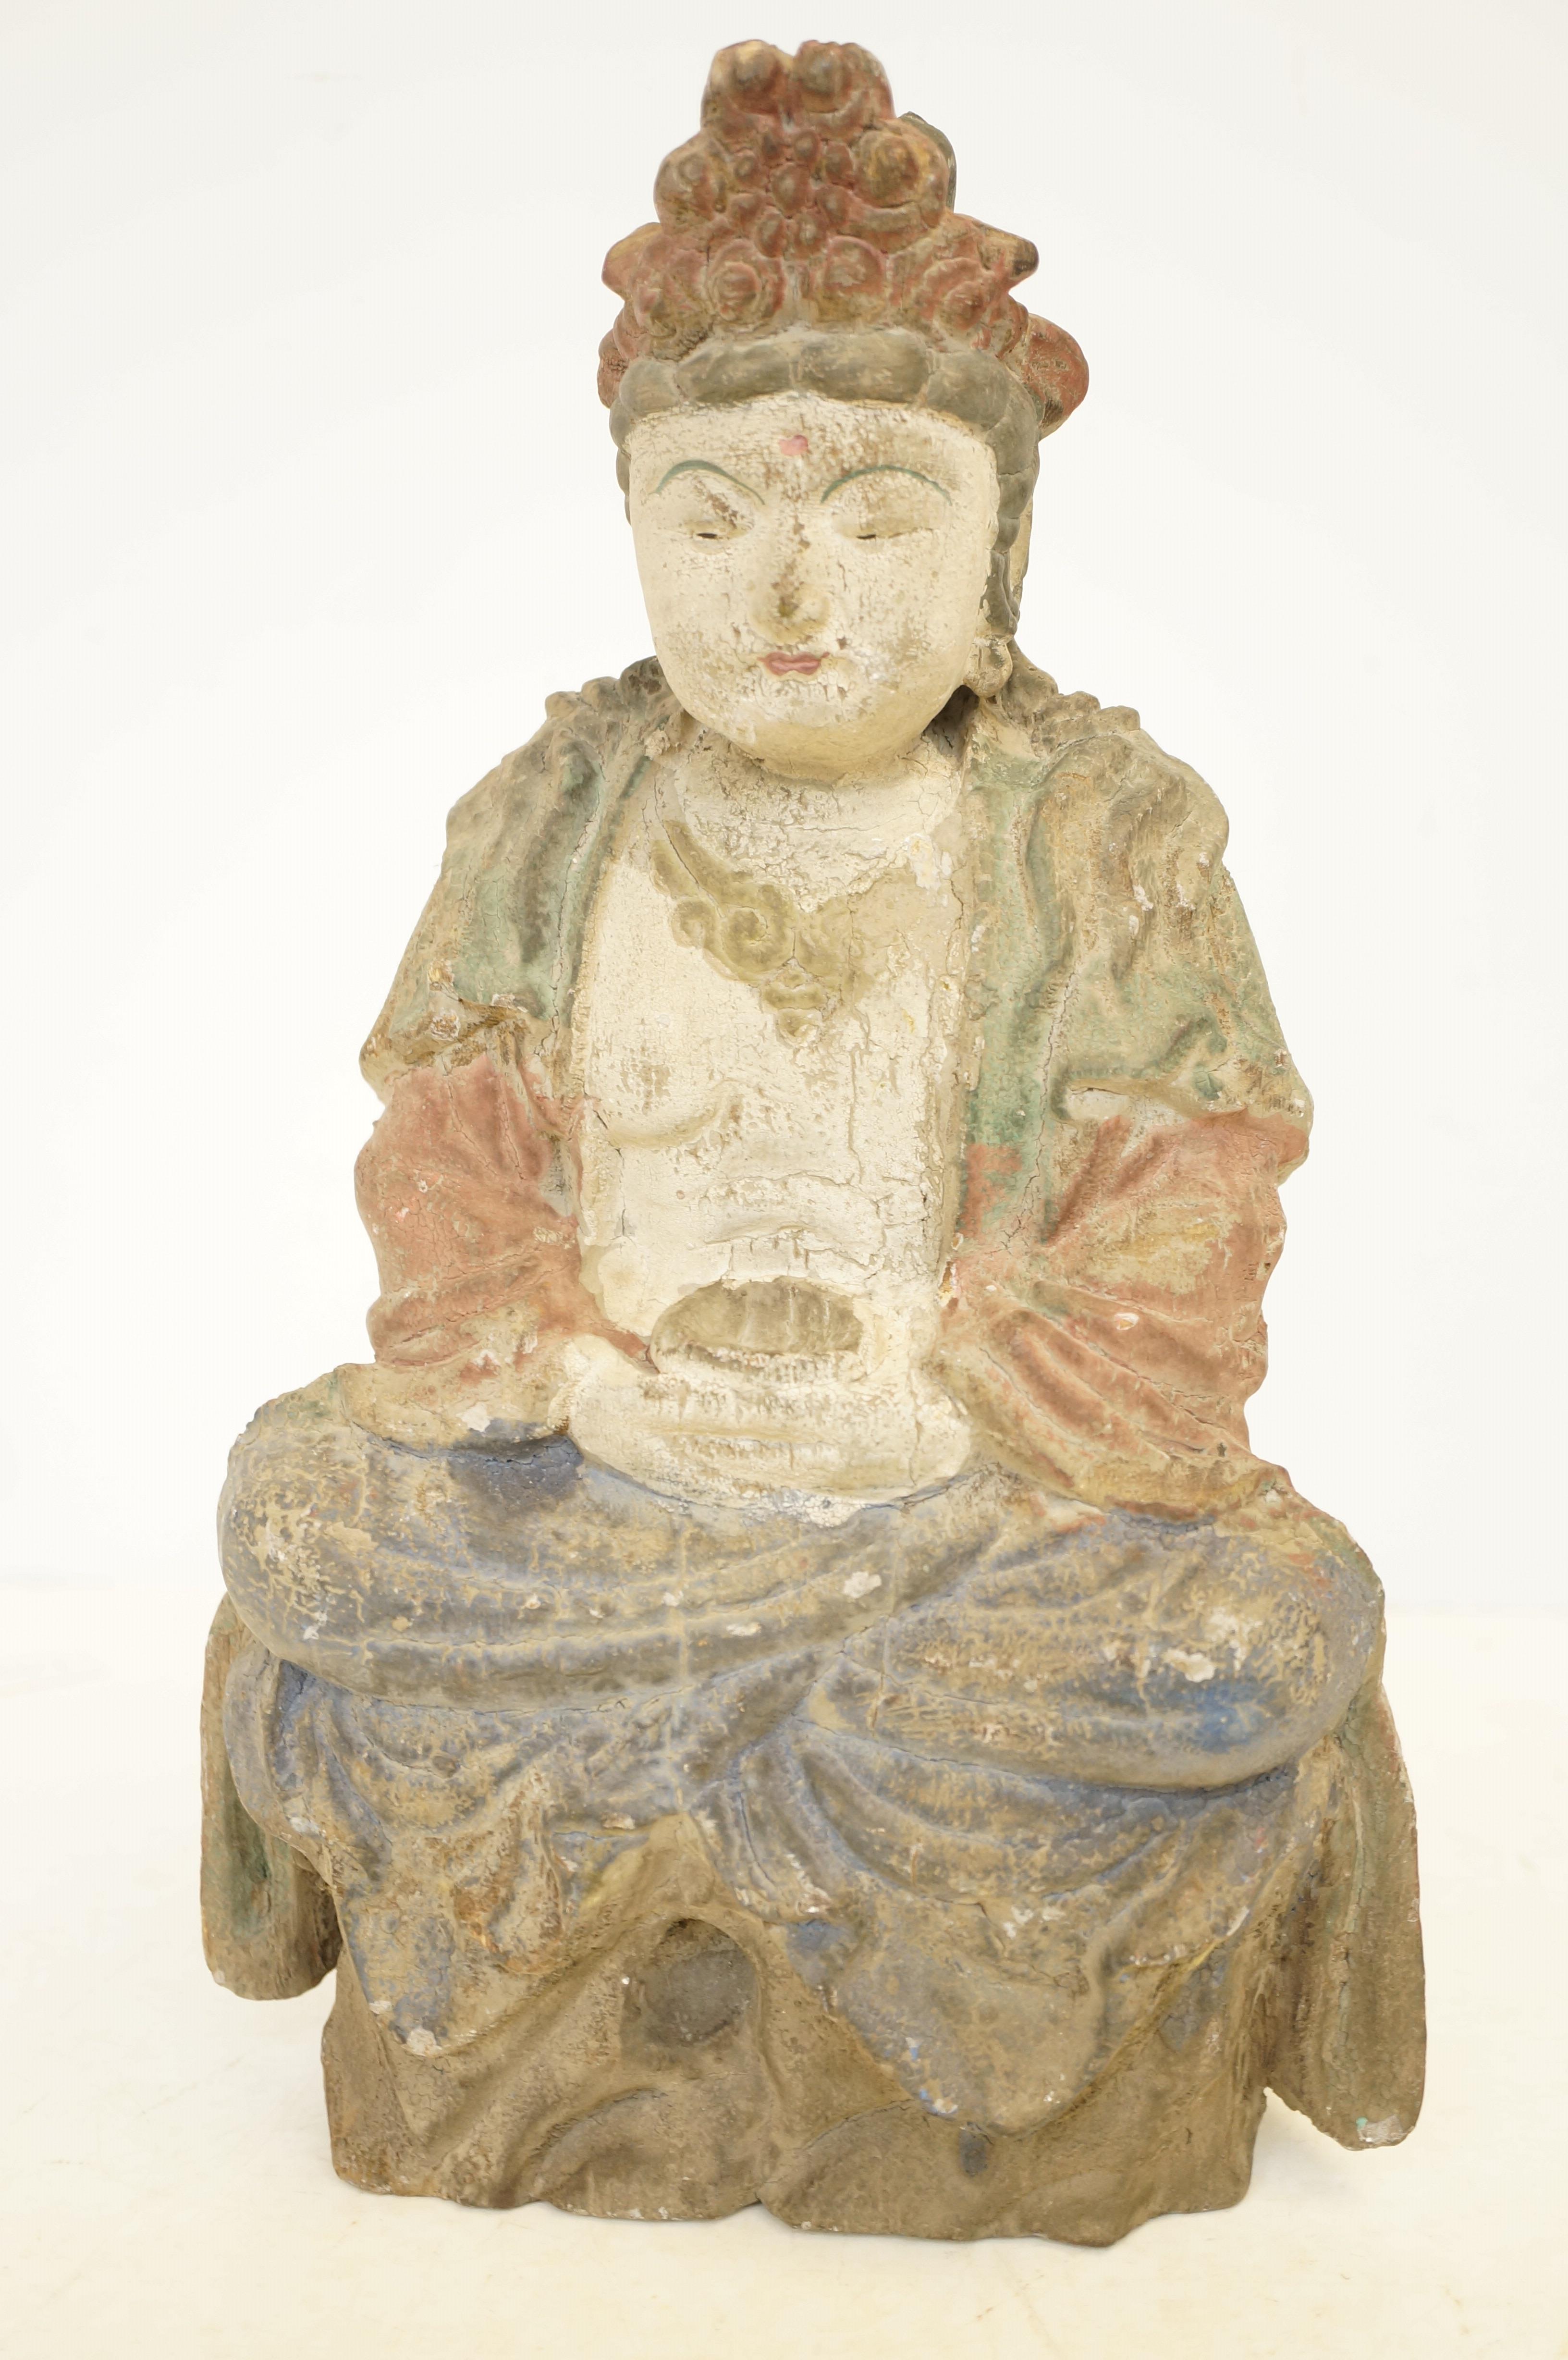 Vintage wooden carved painted seated buddha